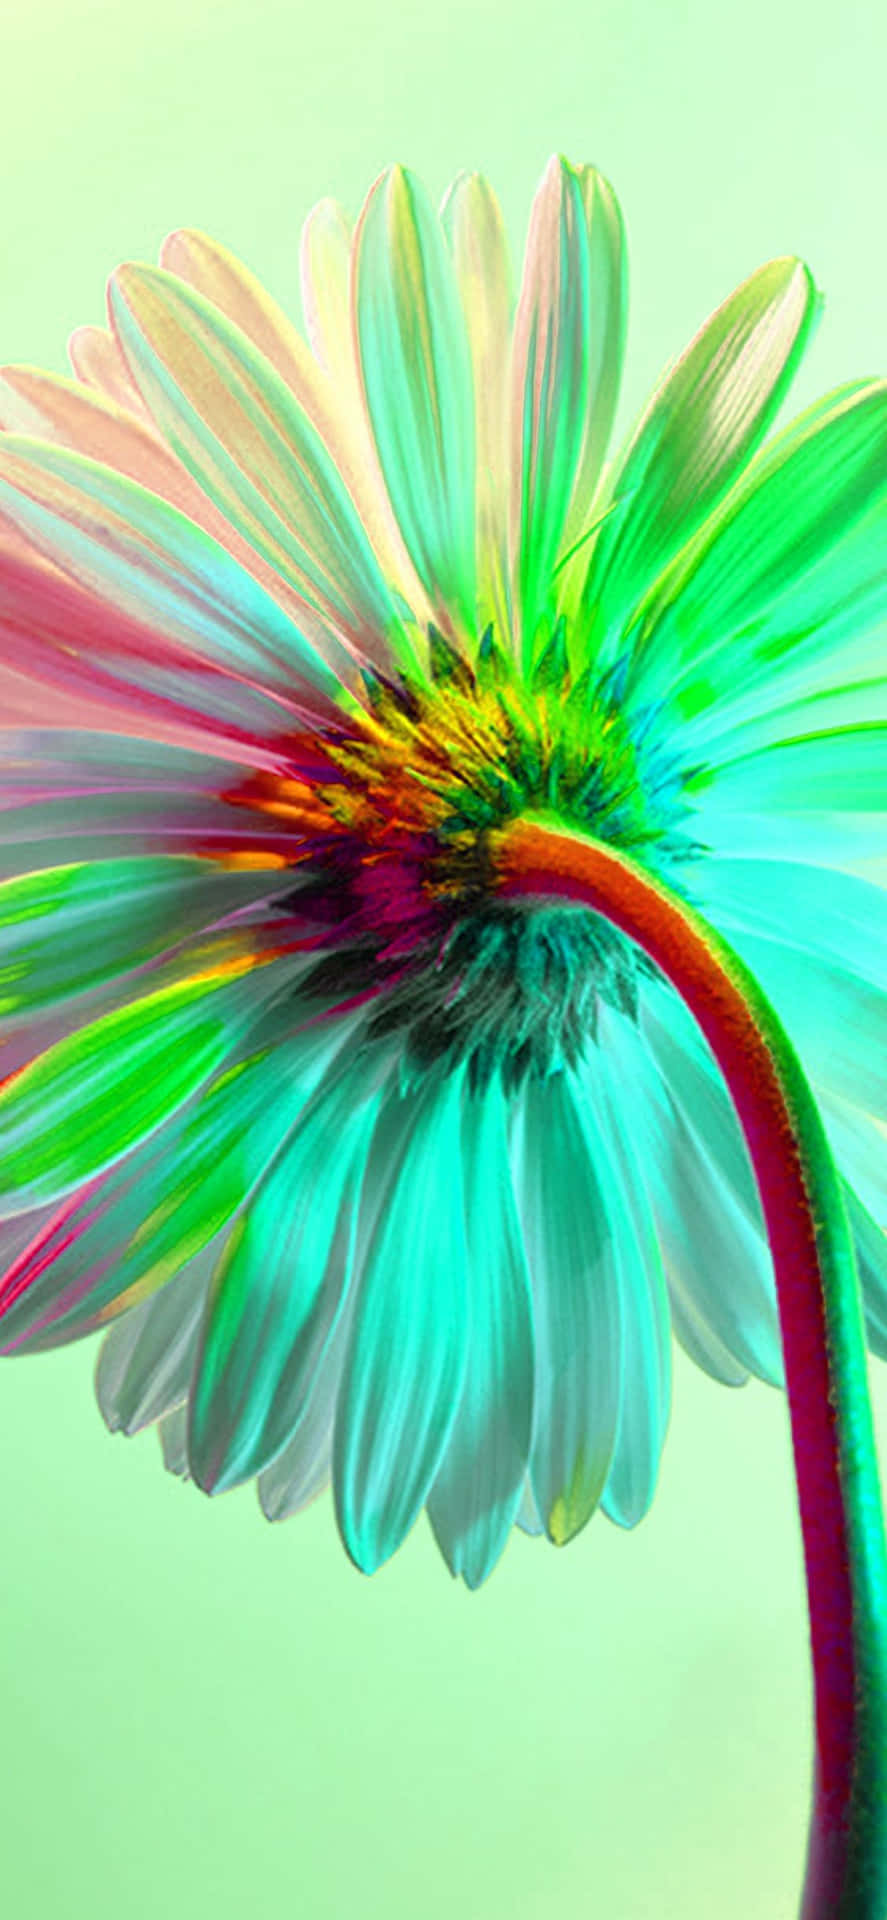 A Colorful Flower With A Green Background Wallpaper